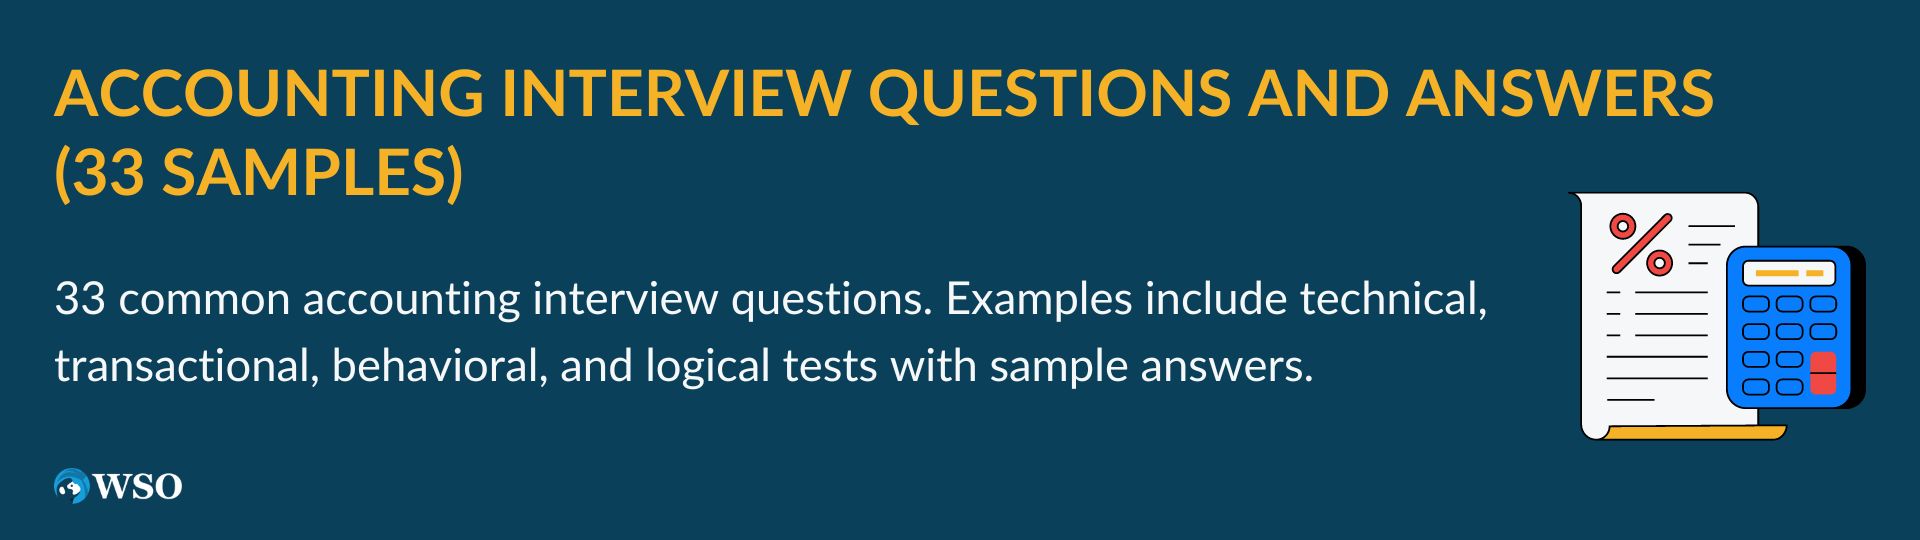 Accounting Interview Questions and Answers (33 Samples)